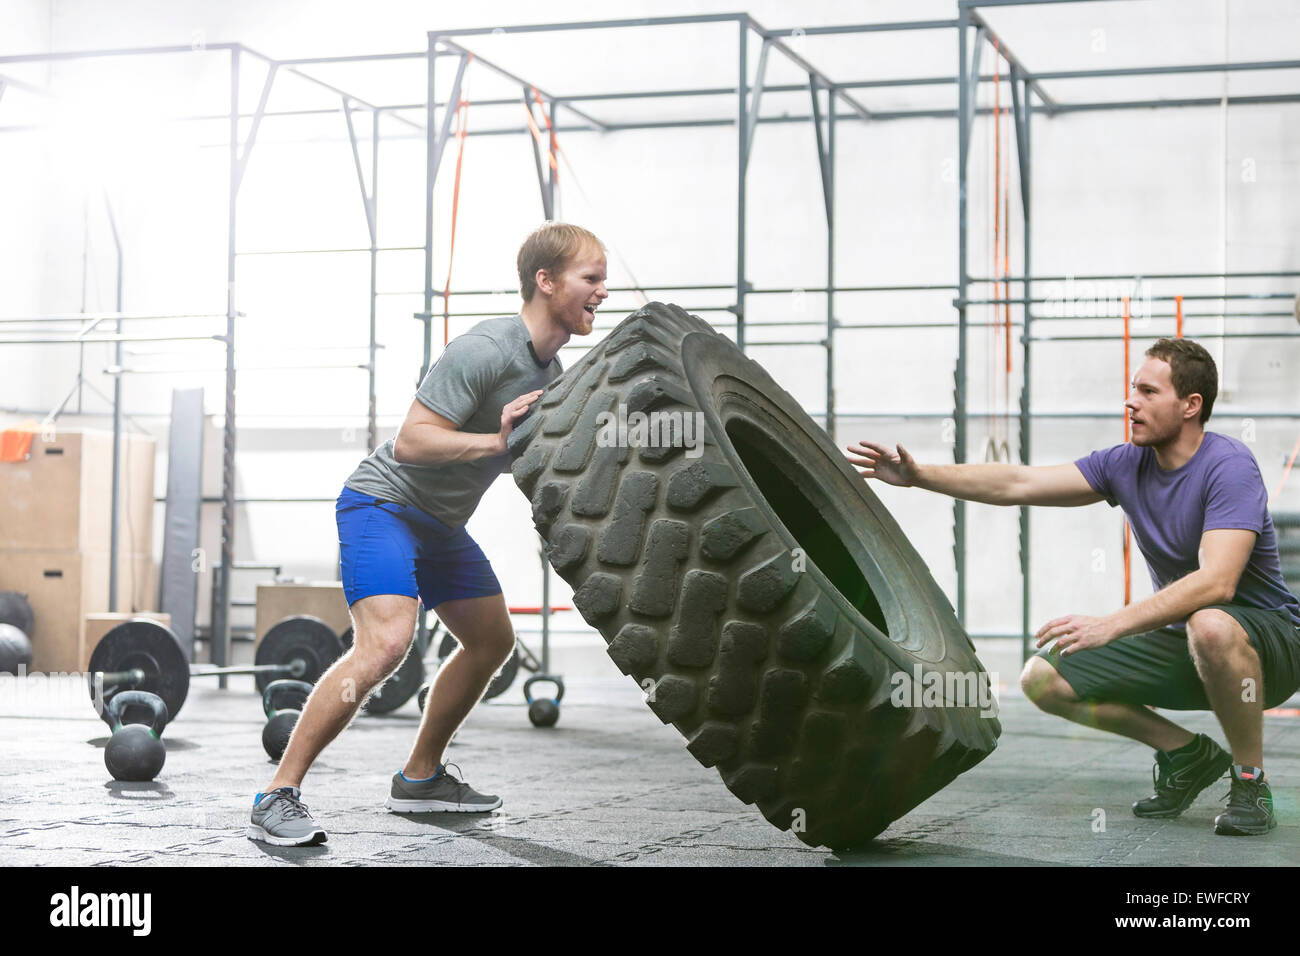 Man assisting at dedicated friend in flipping tire at crossfit gym Stock Photo